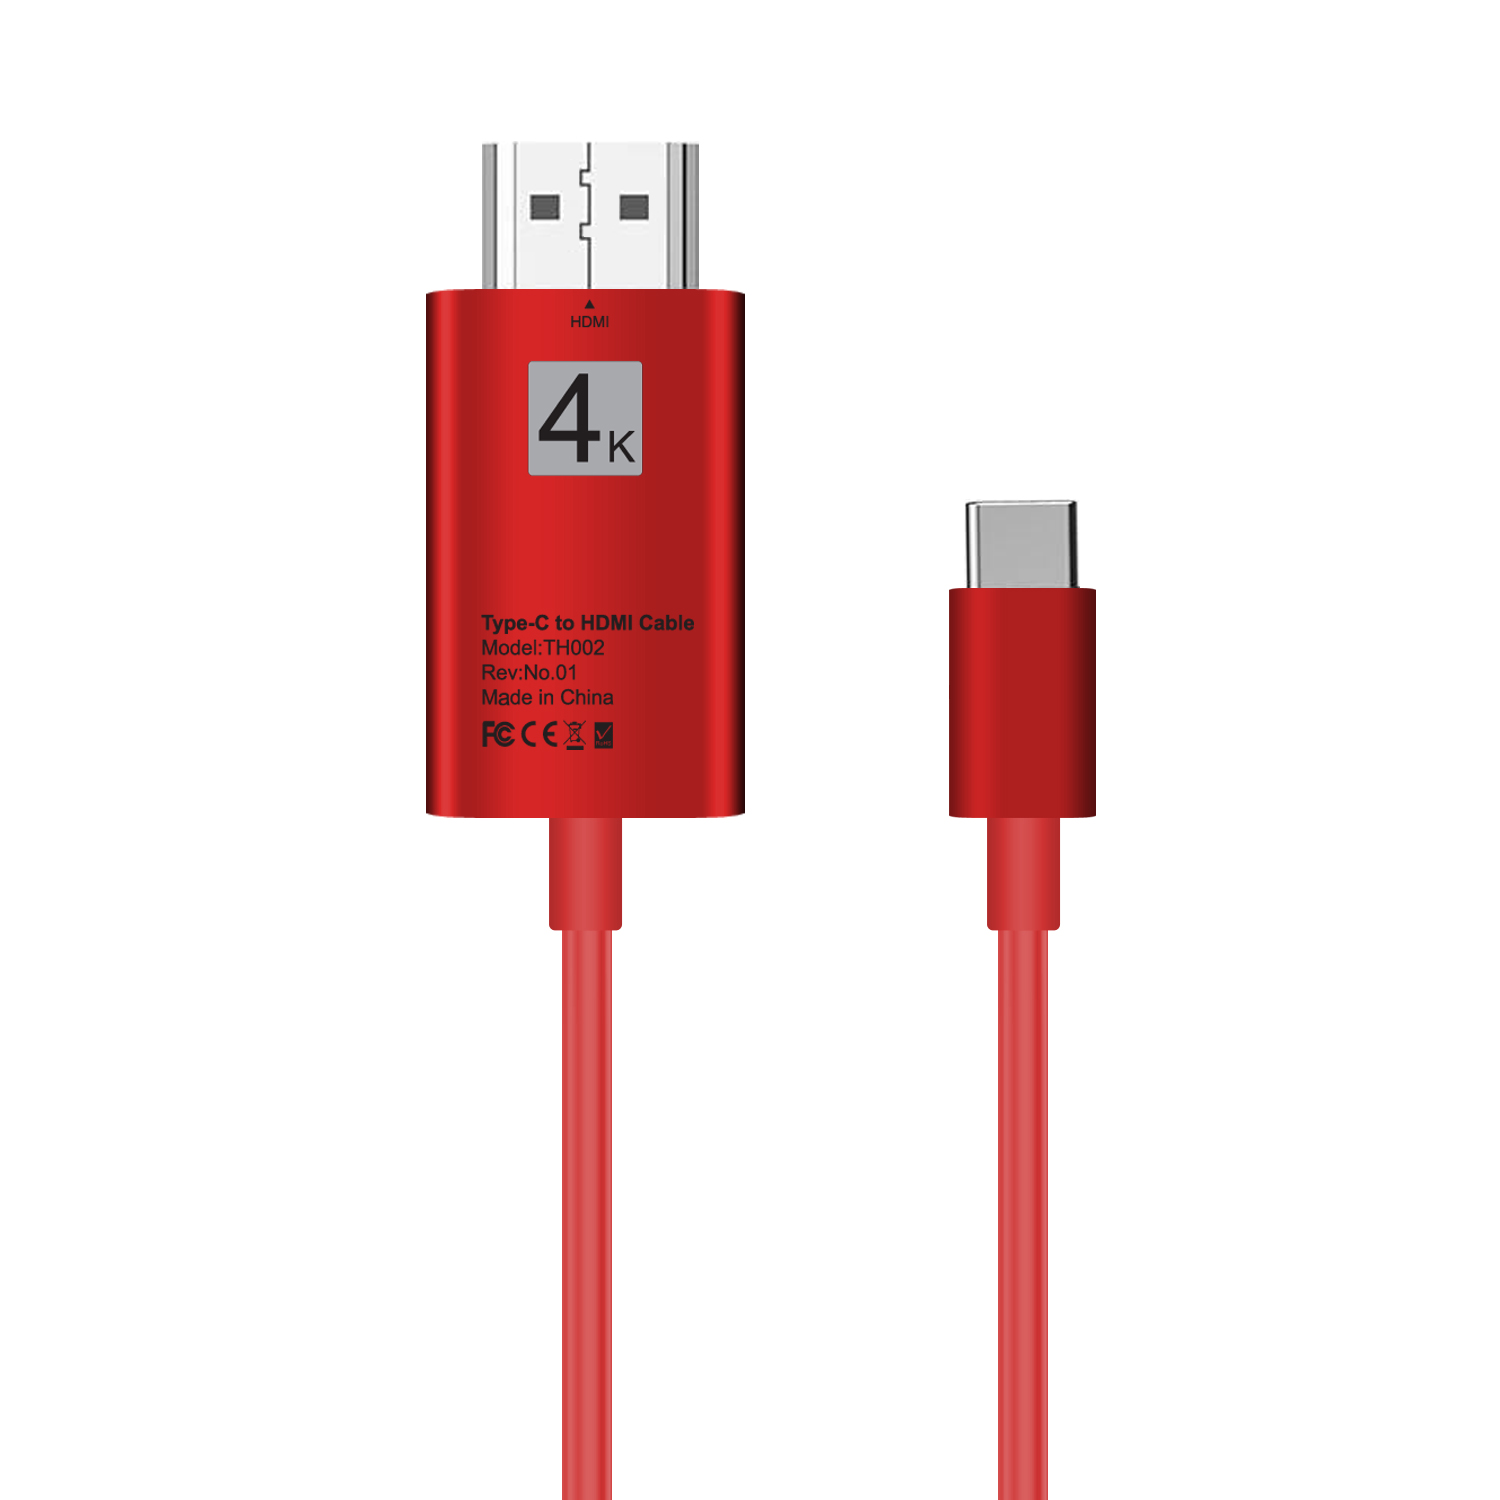 USB Type-C 3.1 Male to HDMI Female Cable